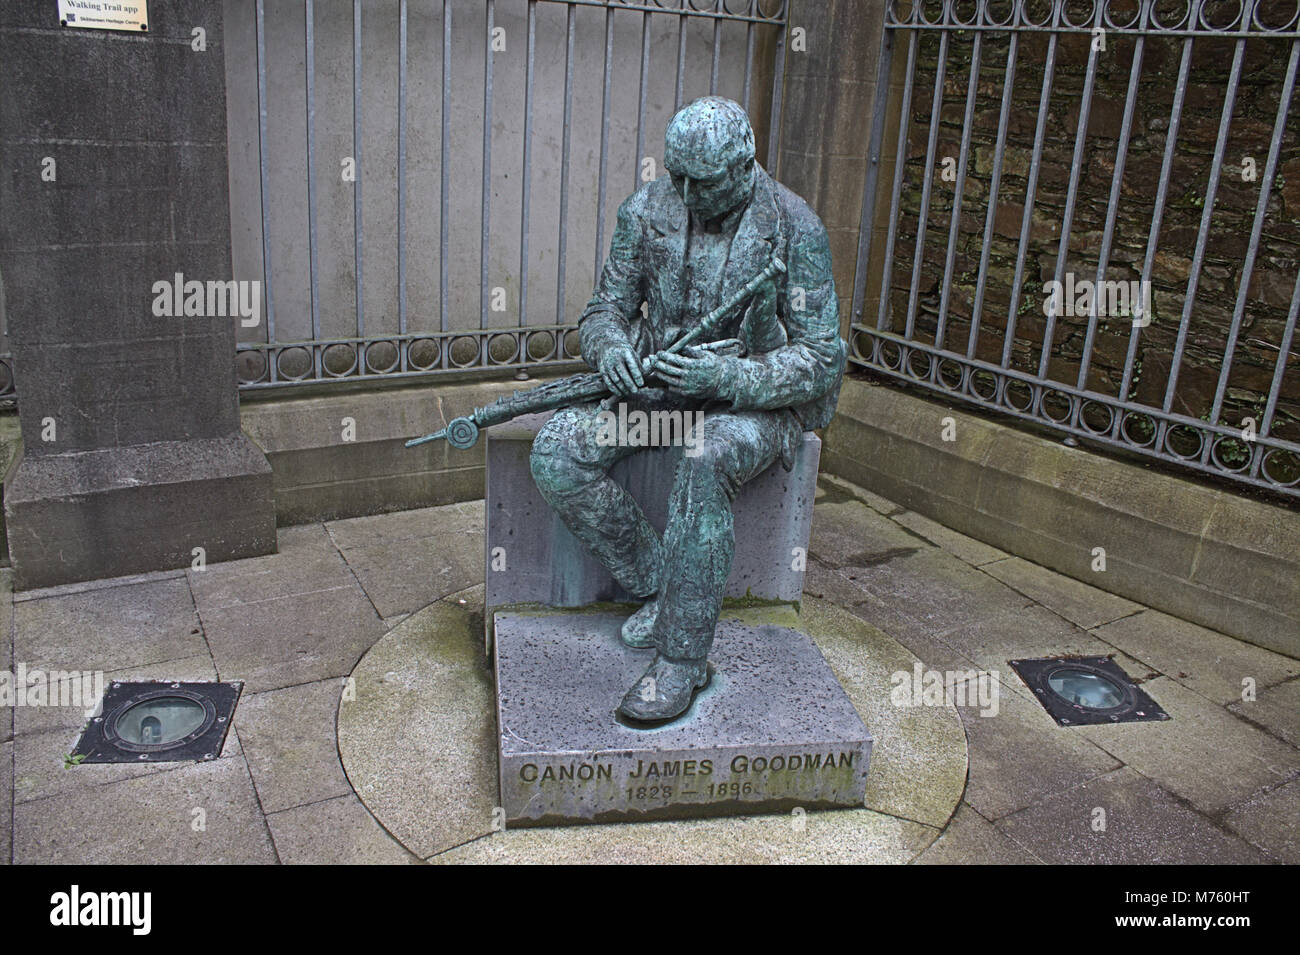 Bronze statue of Cannon Goodman, who was famous in West Cork and Ireland for collecting writing and playing old irish tunes and melodies. Stock Photo